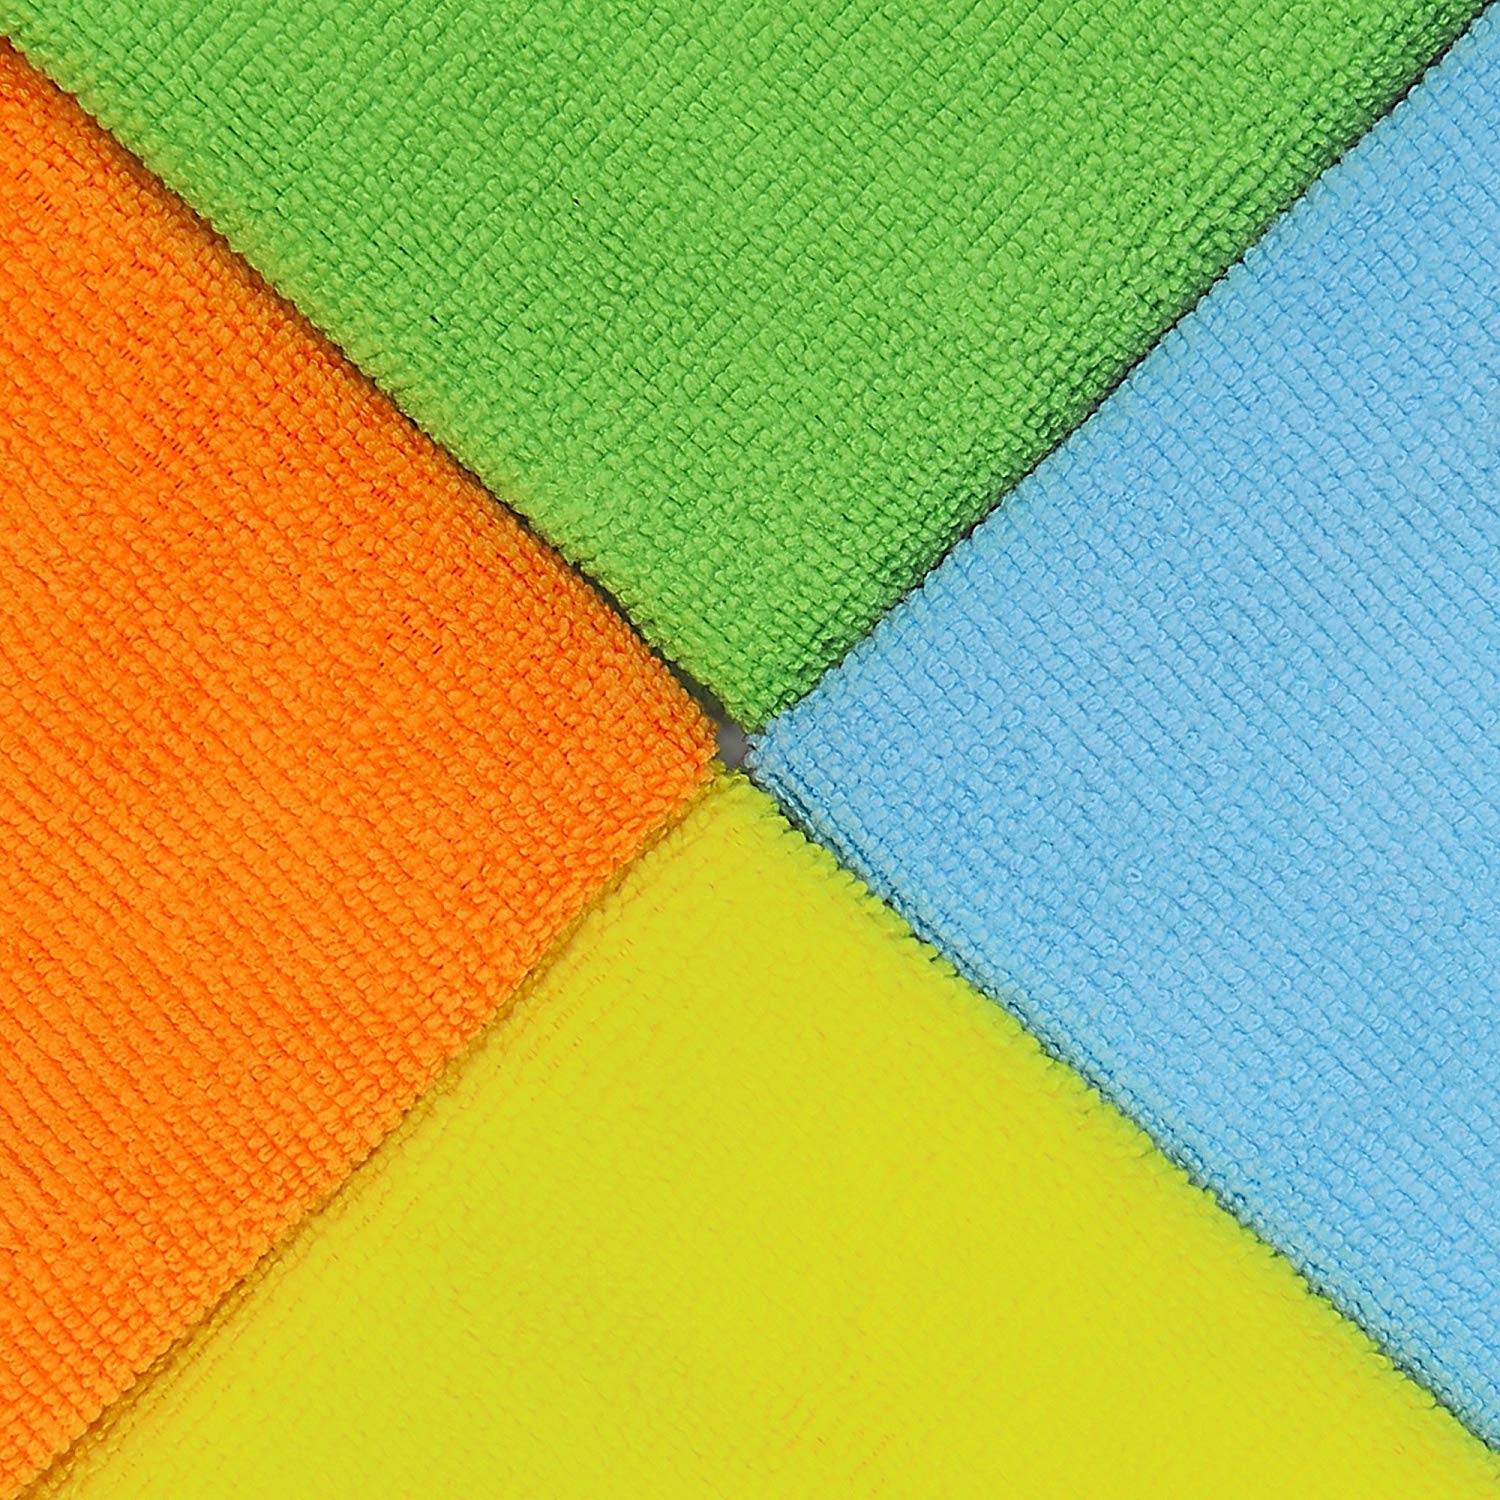 What are the raw materials of microfiber towel?